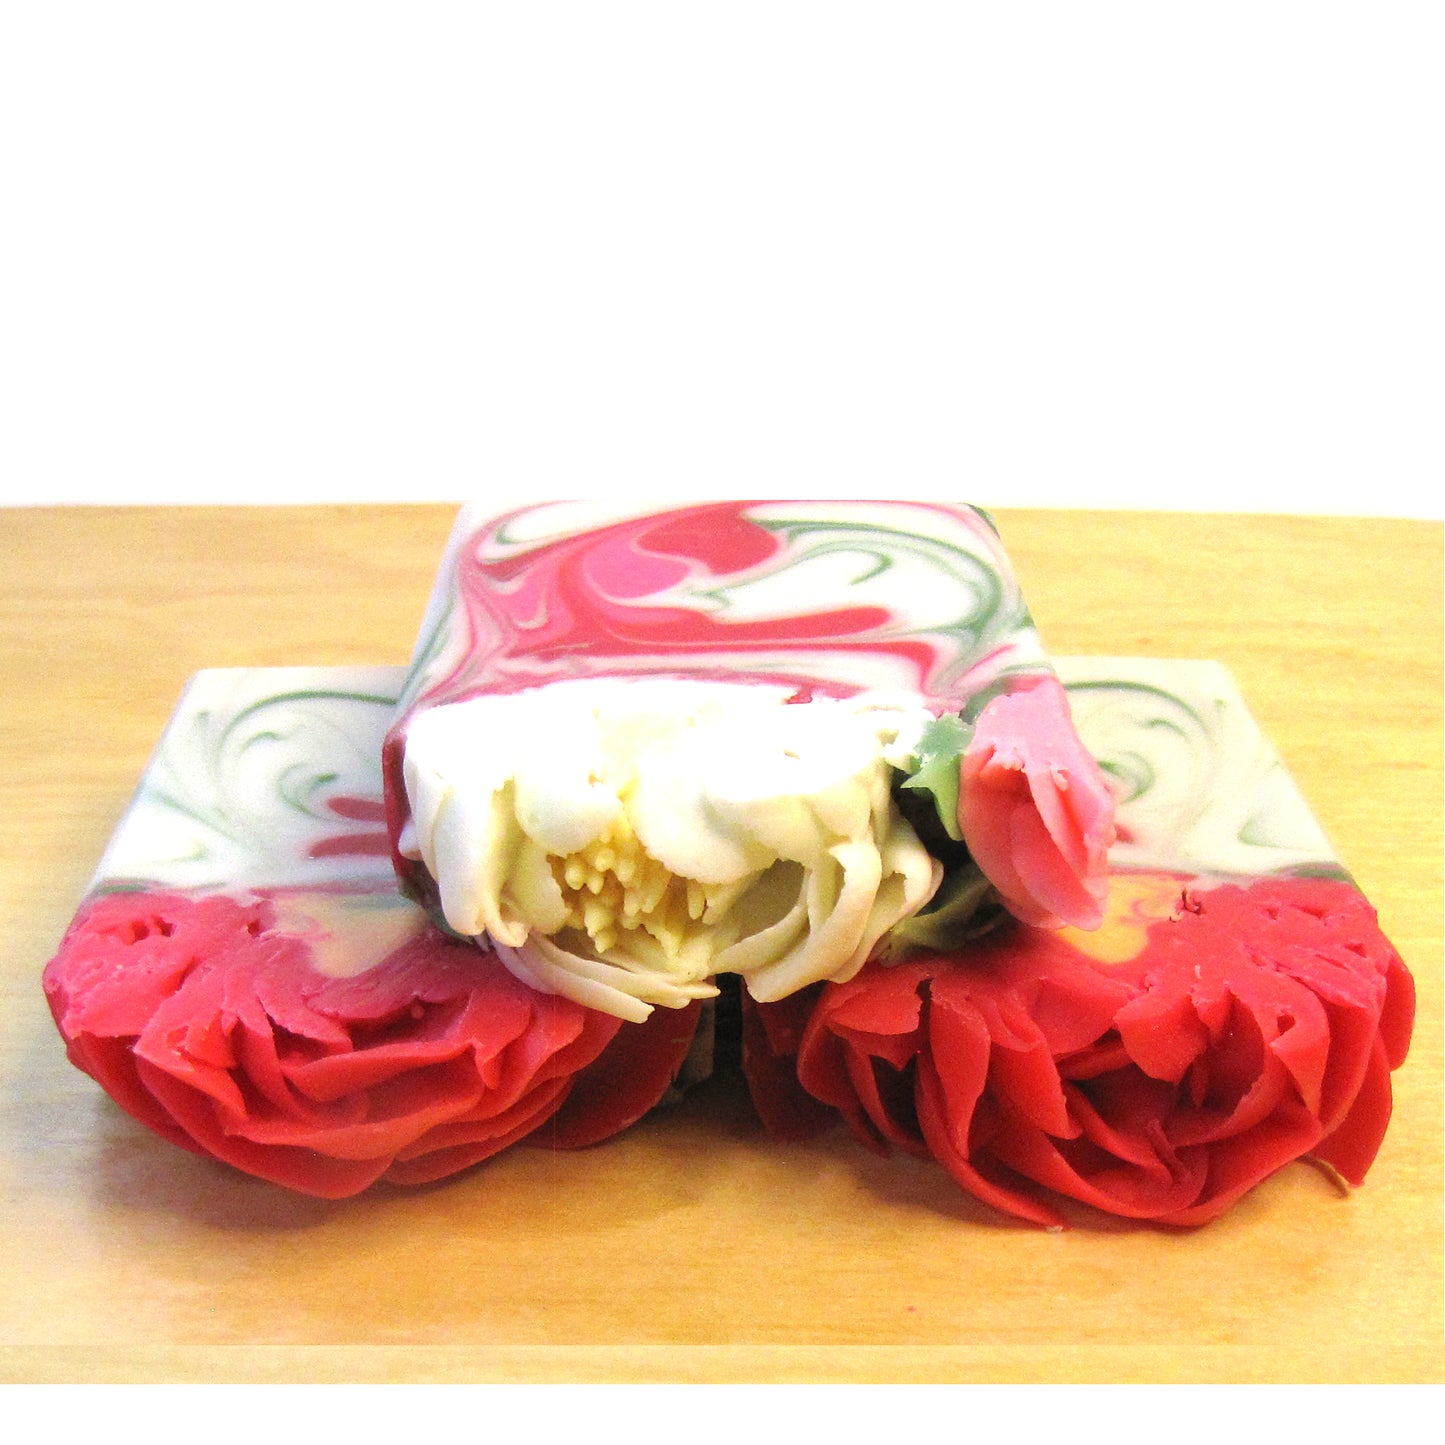 Snow-White & Rose-Red, hand-piped floral soap